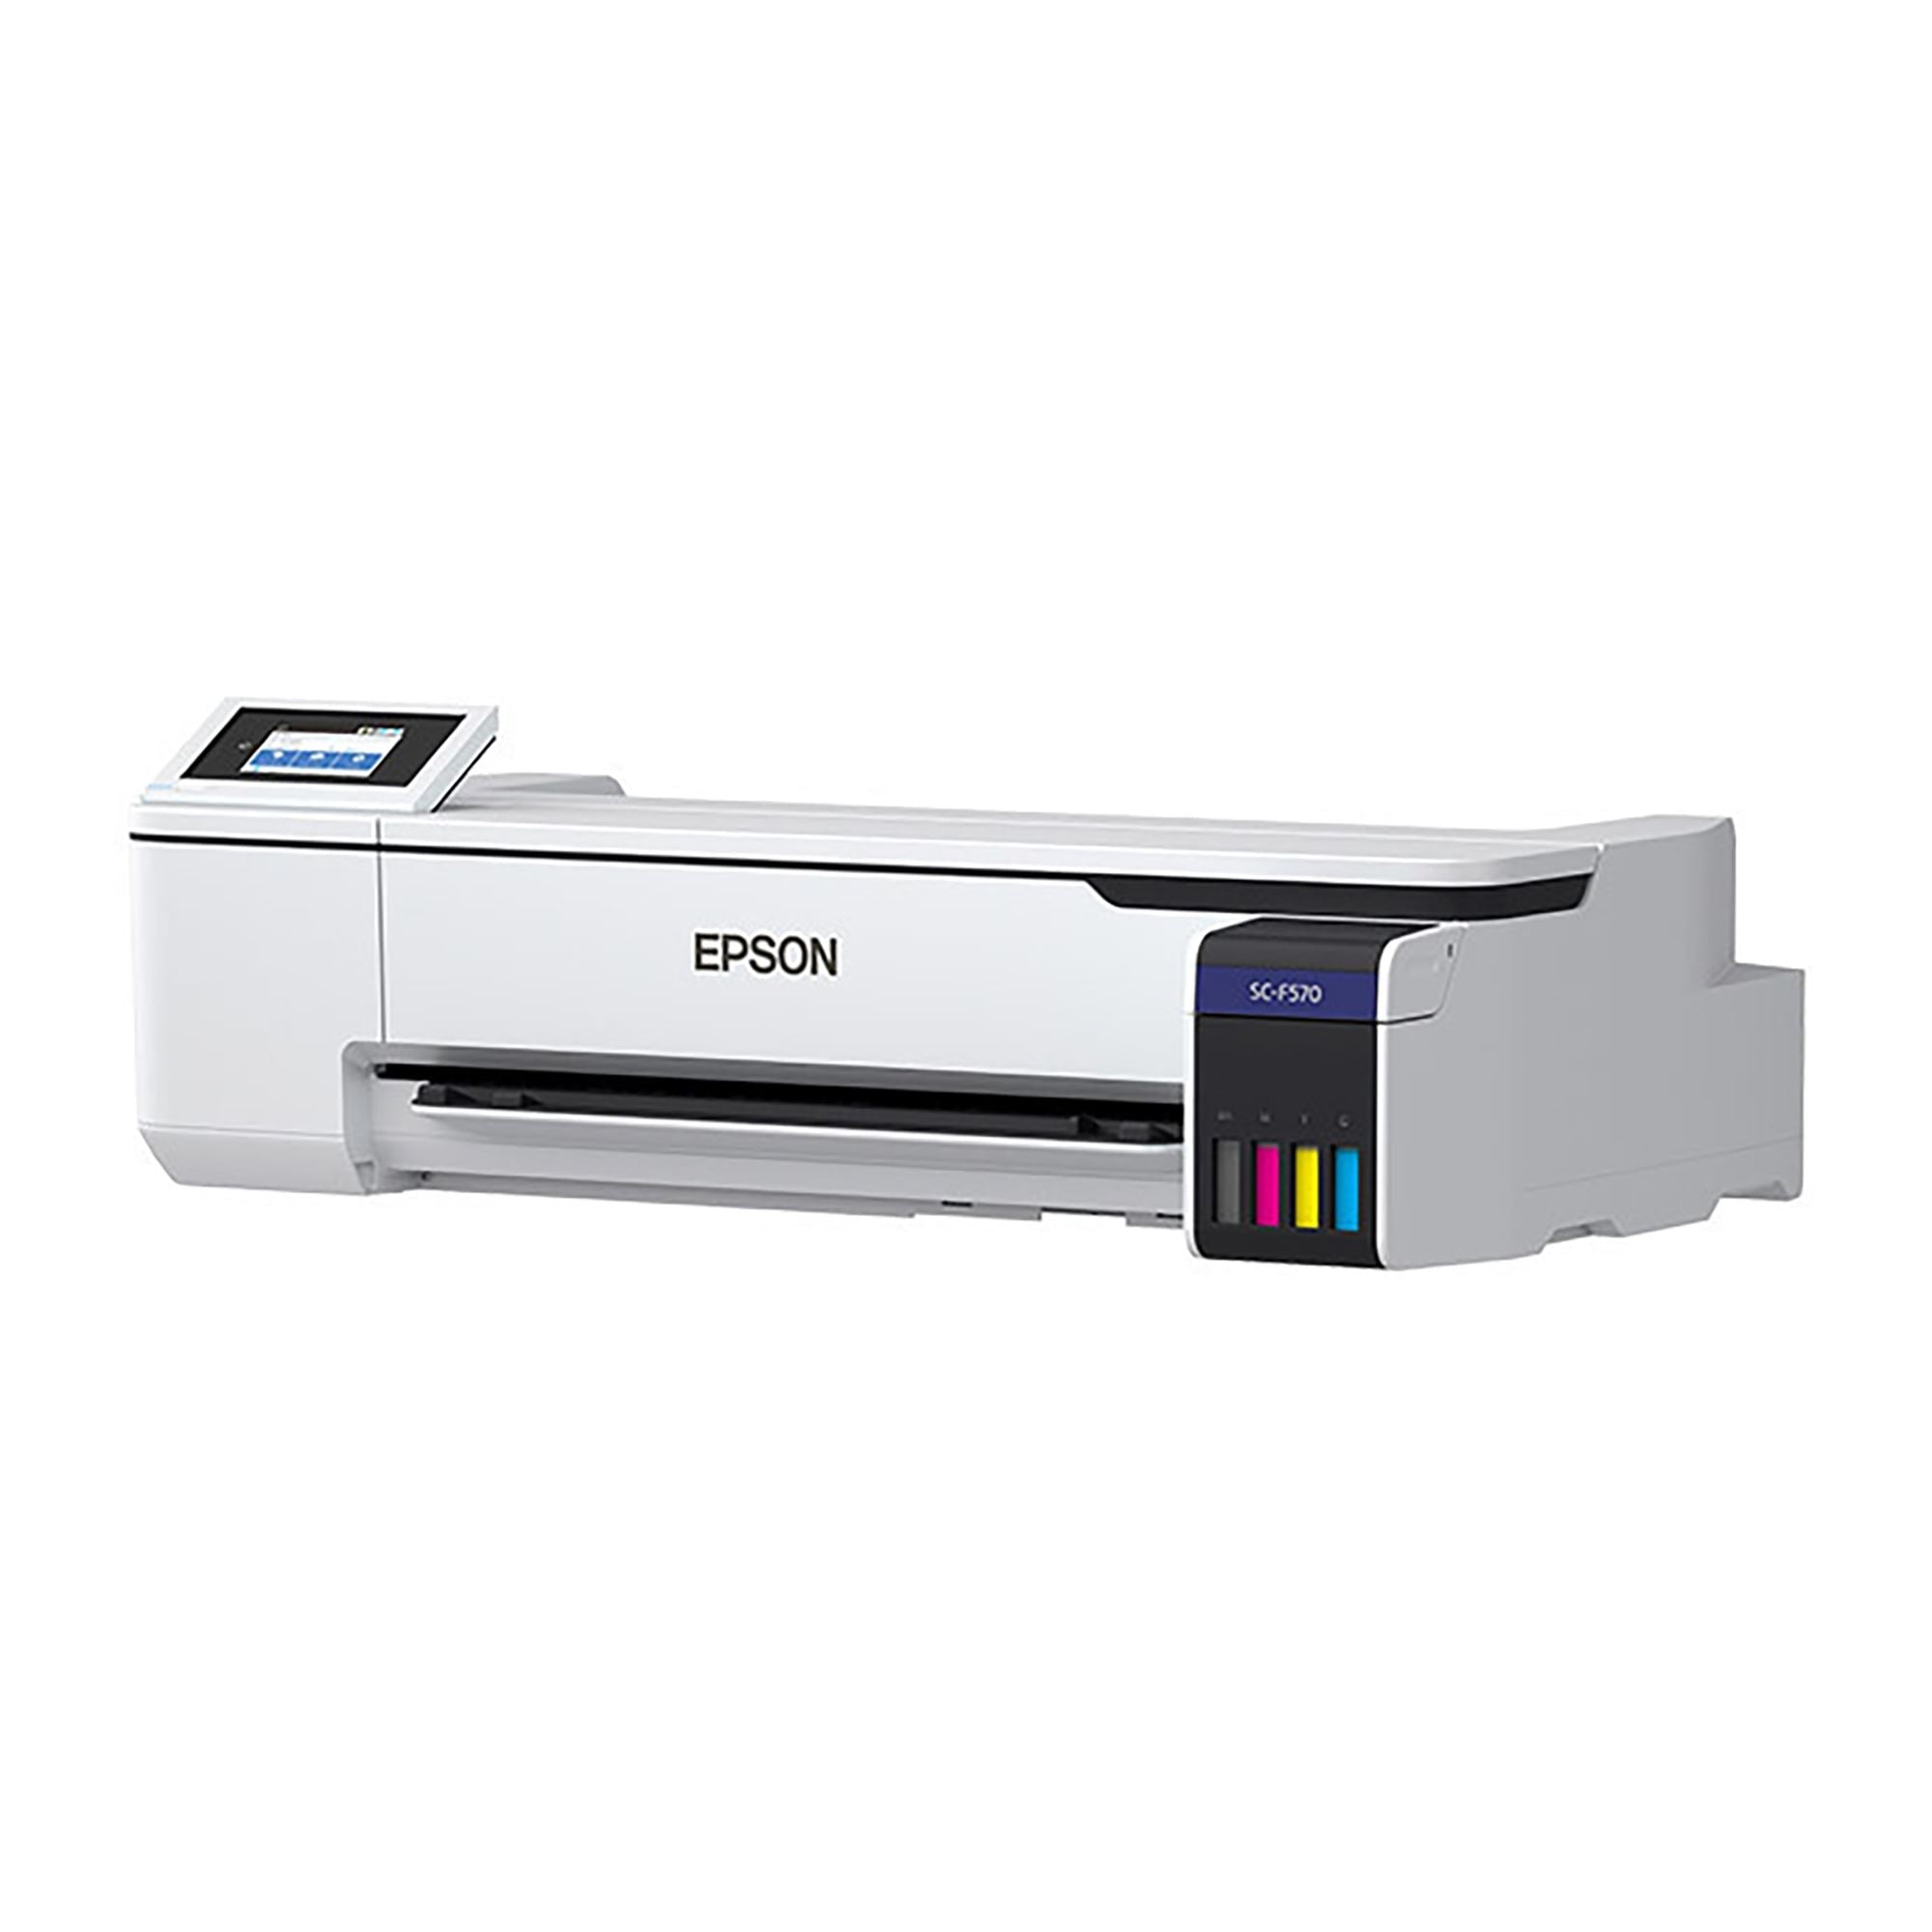 Heat Transfer Printing - Epson, Brother and Canon Ink Tank Printers  available from Discspeed